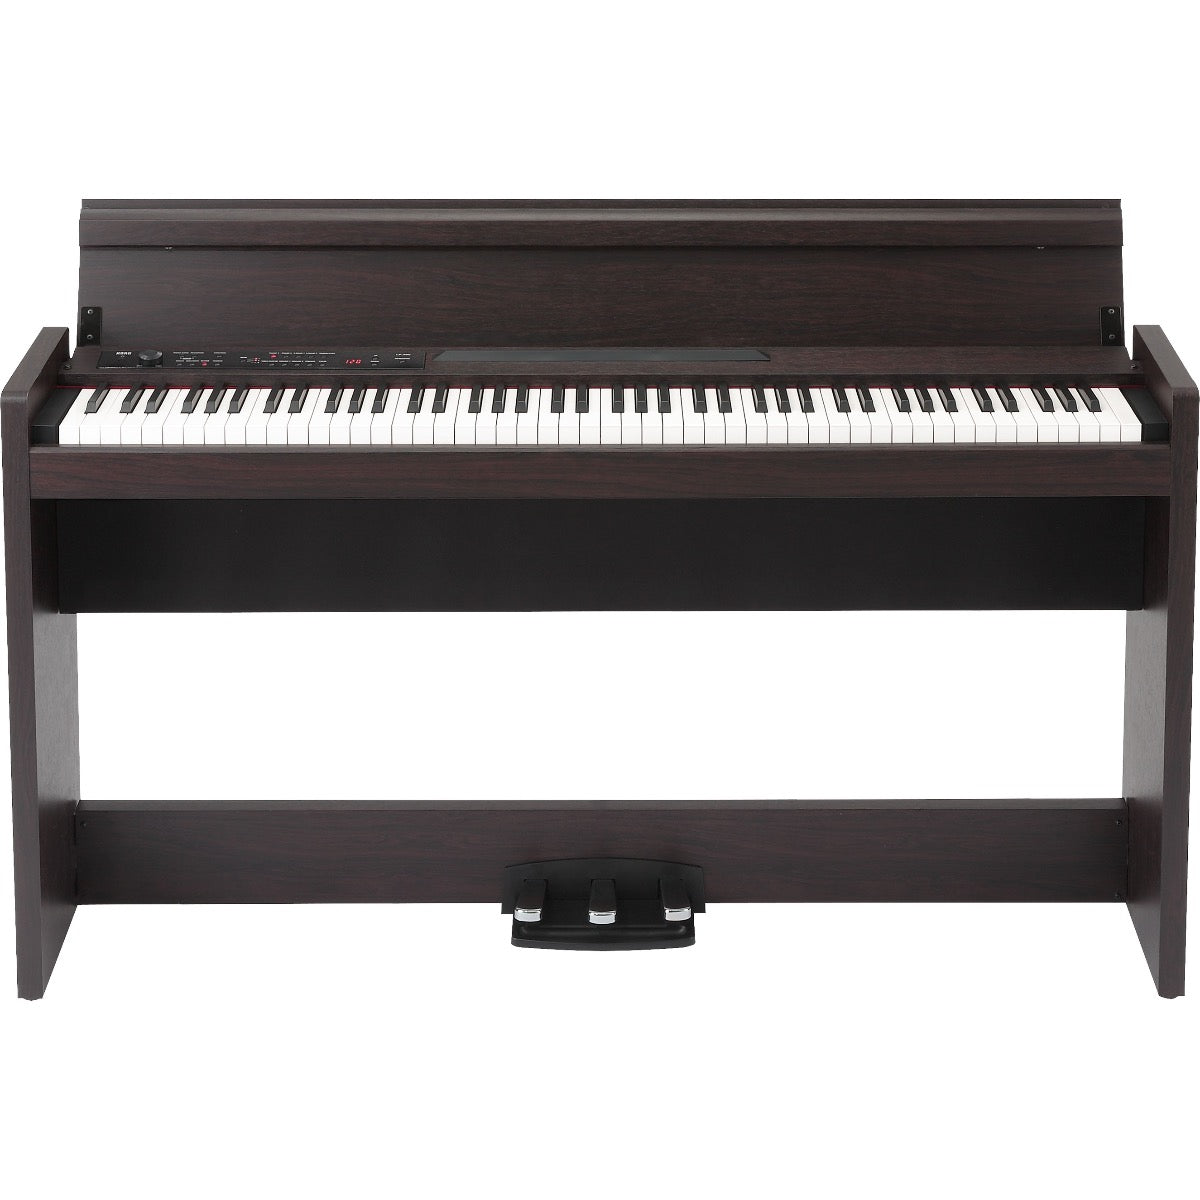 Perspective view of Korg LP-380U Digital Piano - Rosewood showing top and front